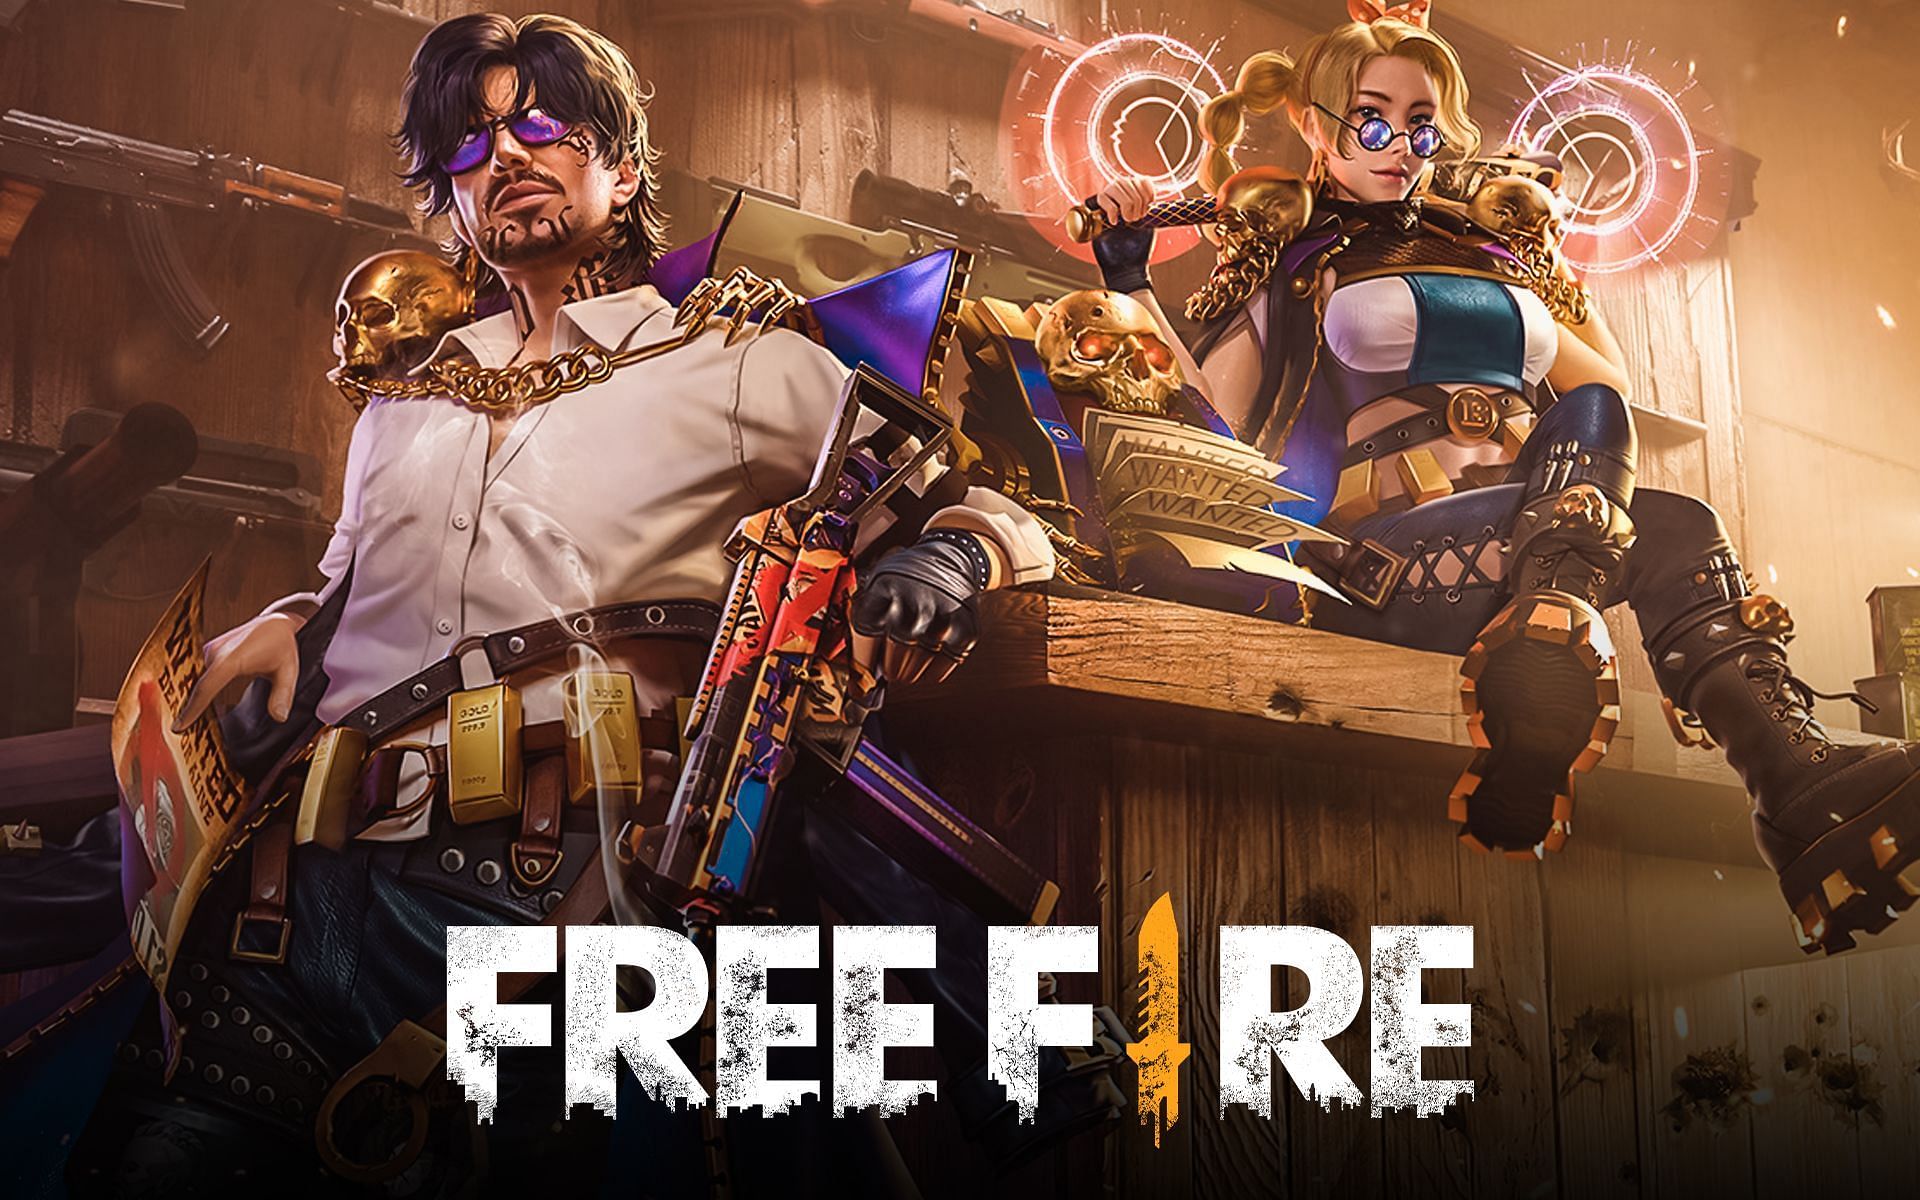 How to play Free Fire demo online without downloading: Step by Step guide